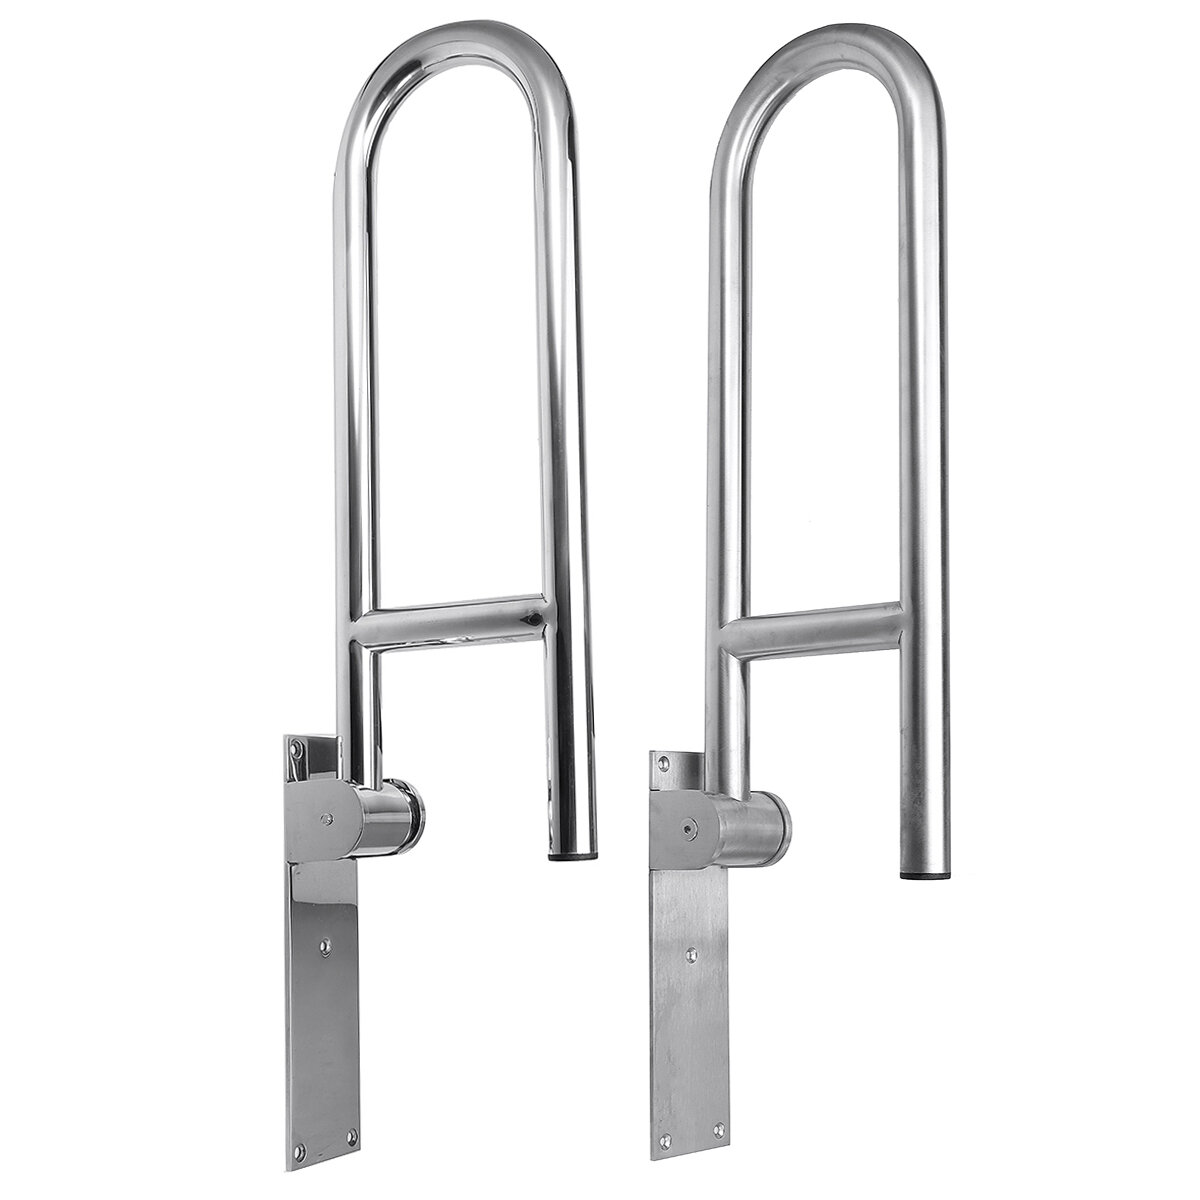 Image of Stainless Steel Toilet Safety Frame Rail Grab Bar Handicap Bathroom Hand Grips